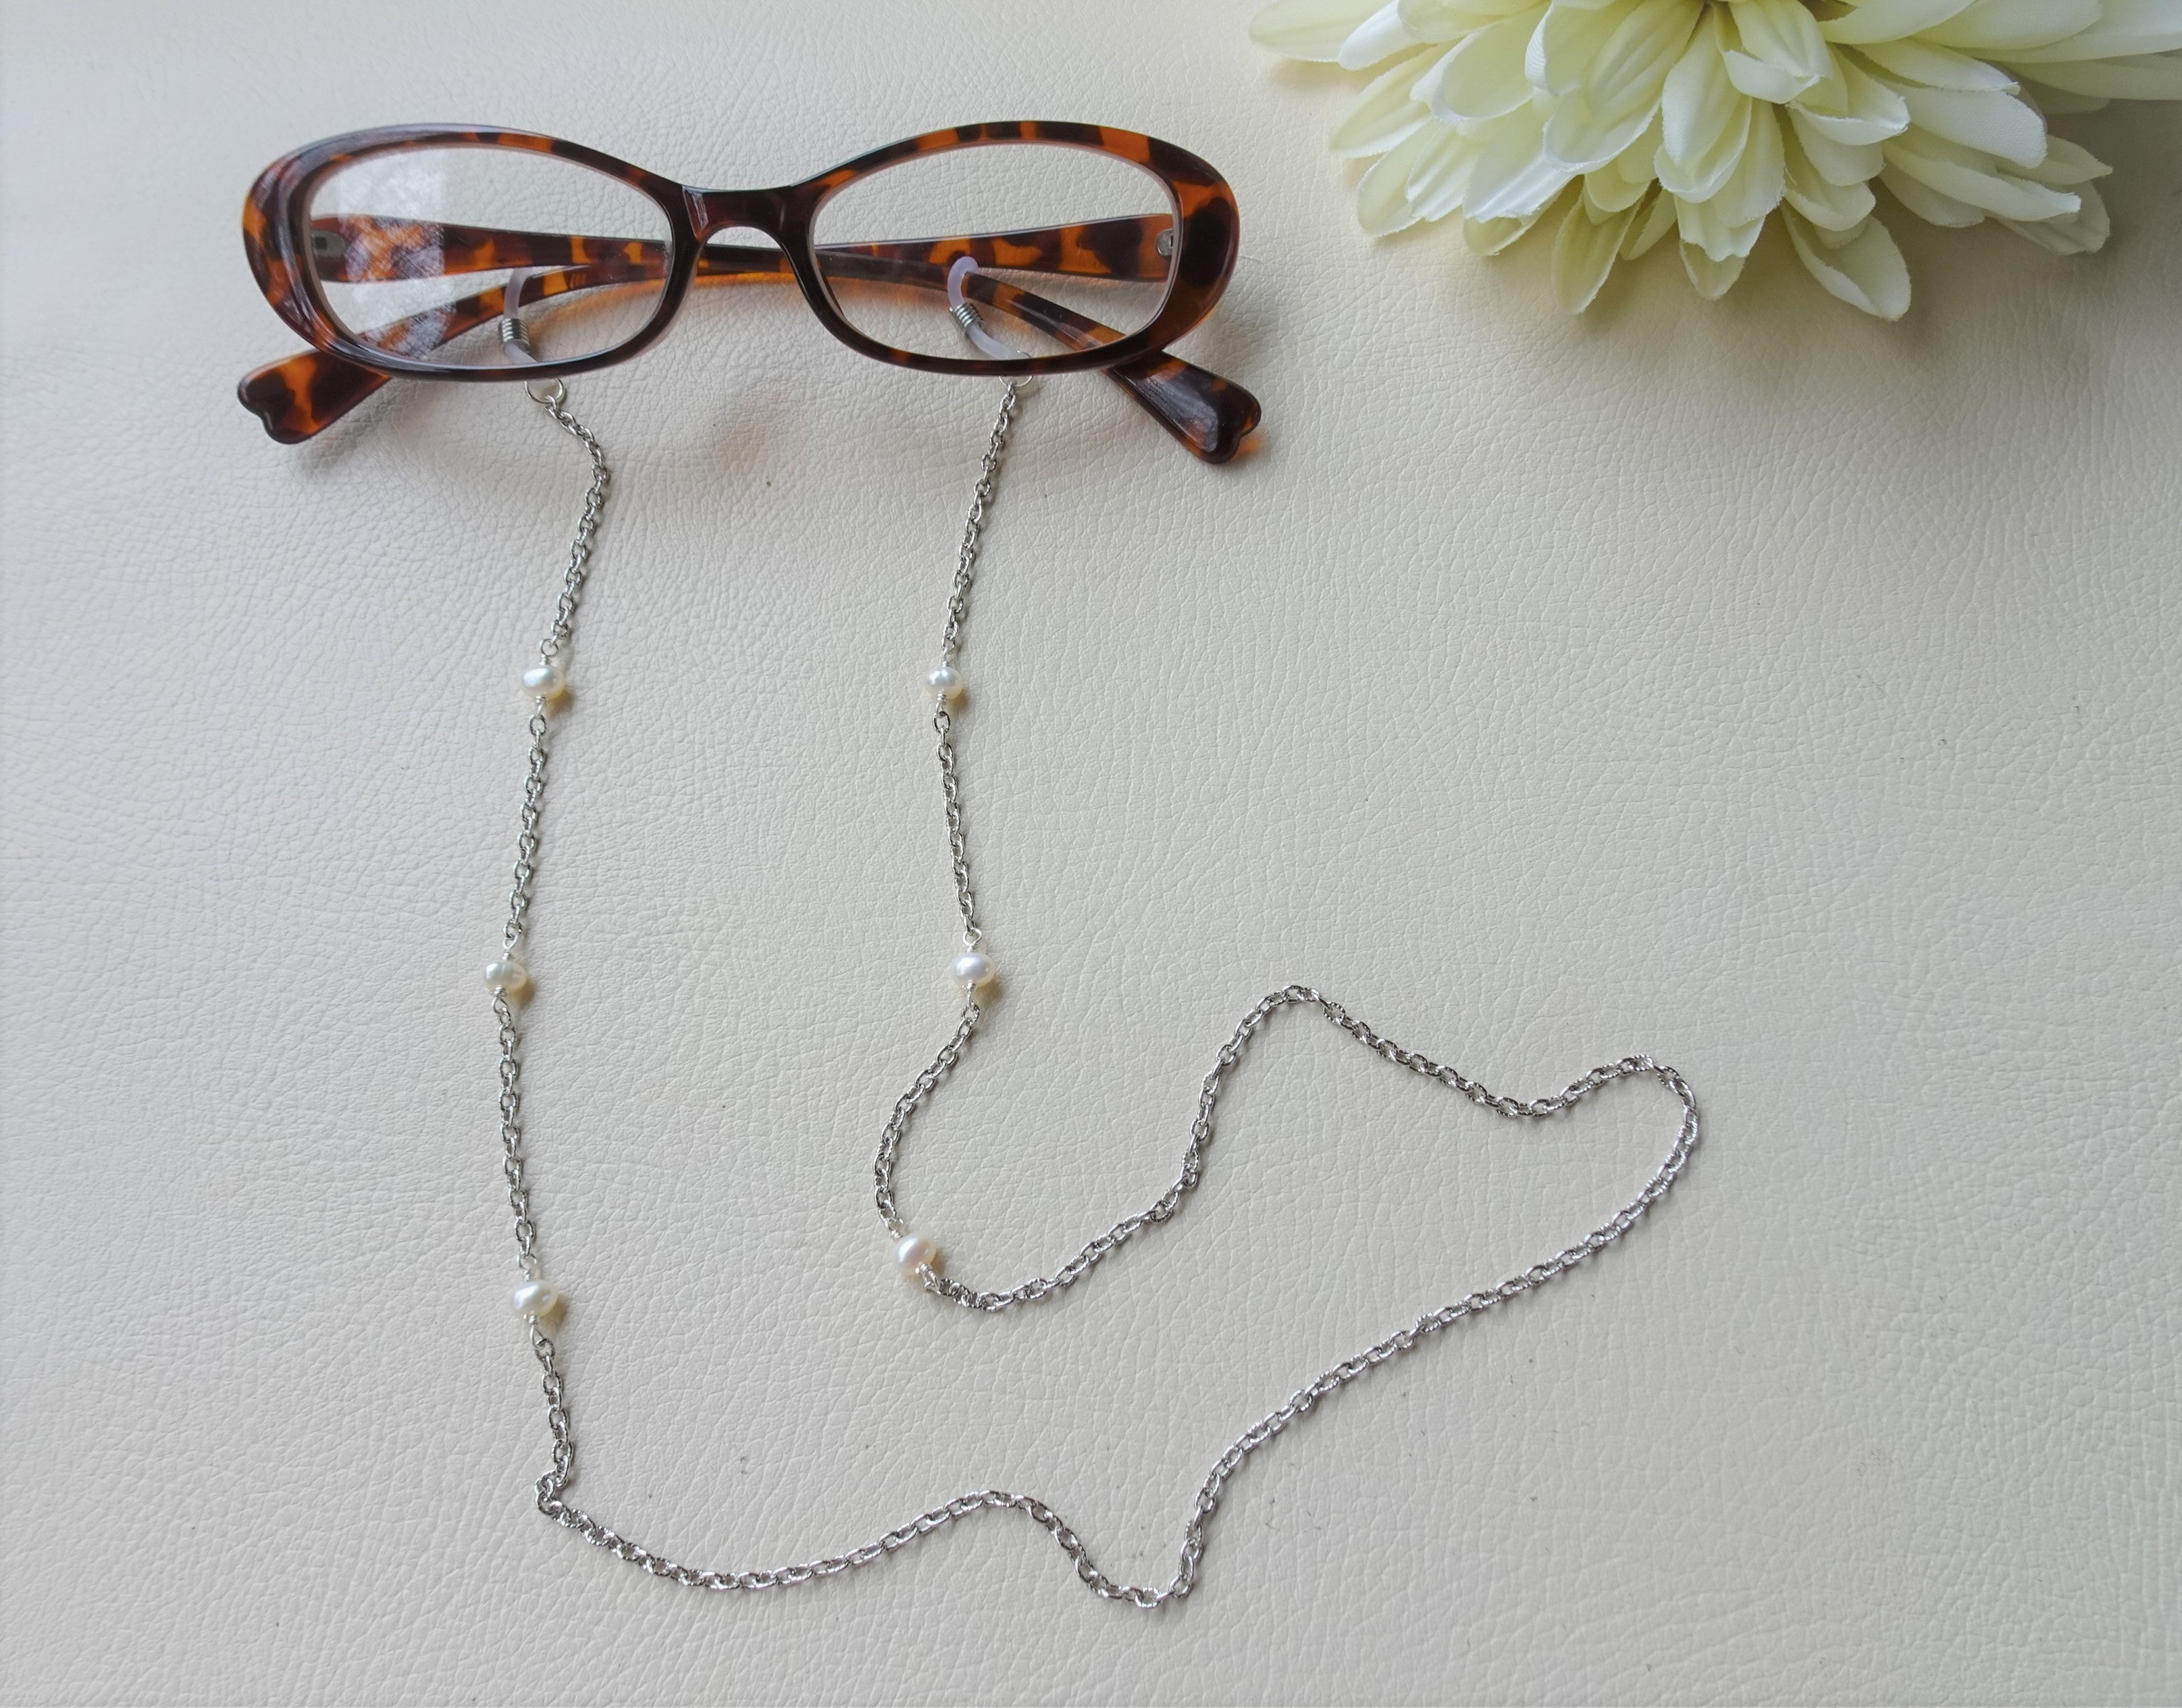 Silver Eyeglass Chain With Butterfly, Eyeglass Holder Necklace, Glasses  Lanyard, Chain for Glasses, Eyeglasses Necklace, Handmade Jewelry 